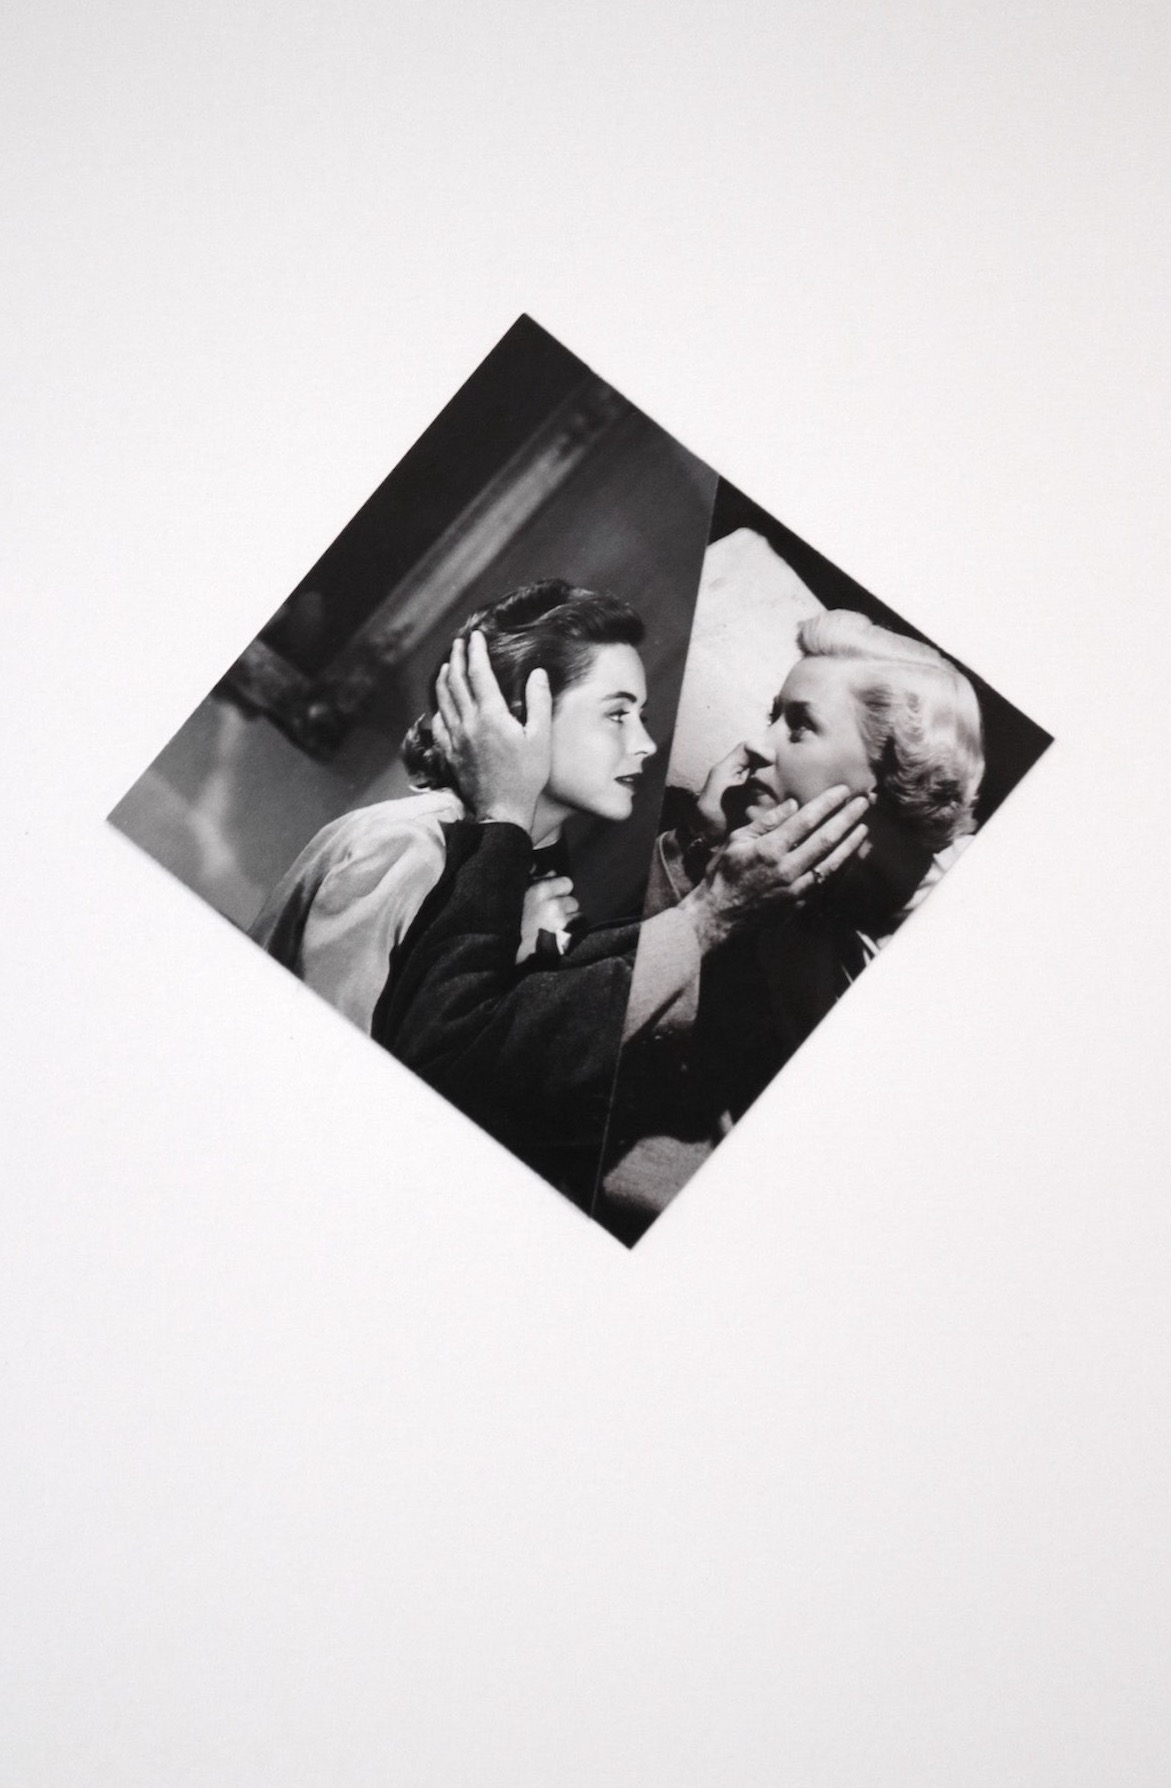 a black and white diamond shaped collage. two women embrace at the cheek, a single cut fusing them.